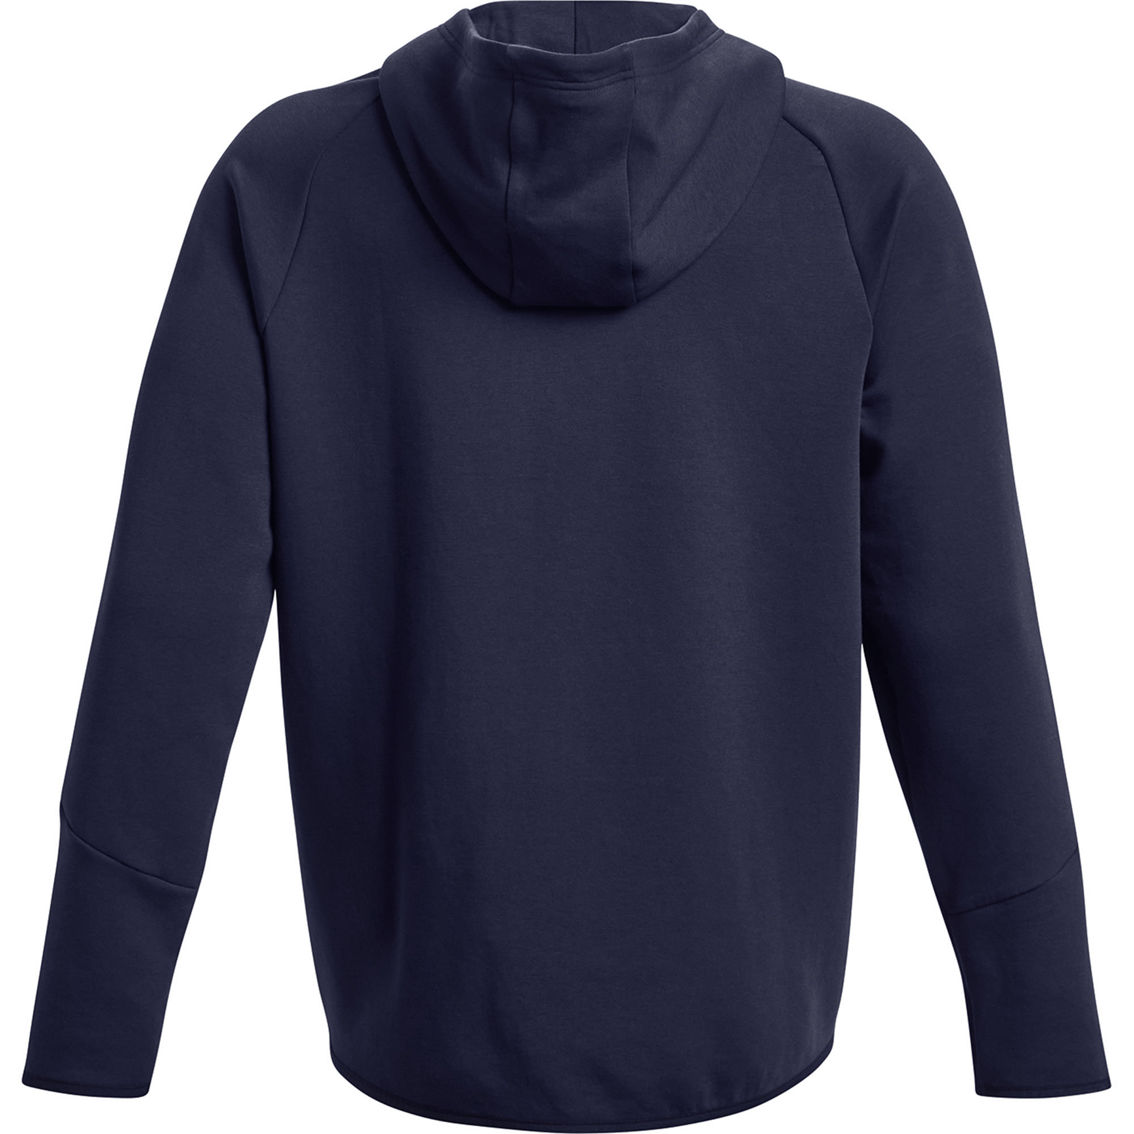 Under Armour Unstoppable Fleece Full Zip - Image 6 of 6